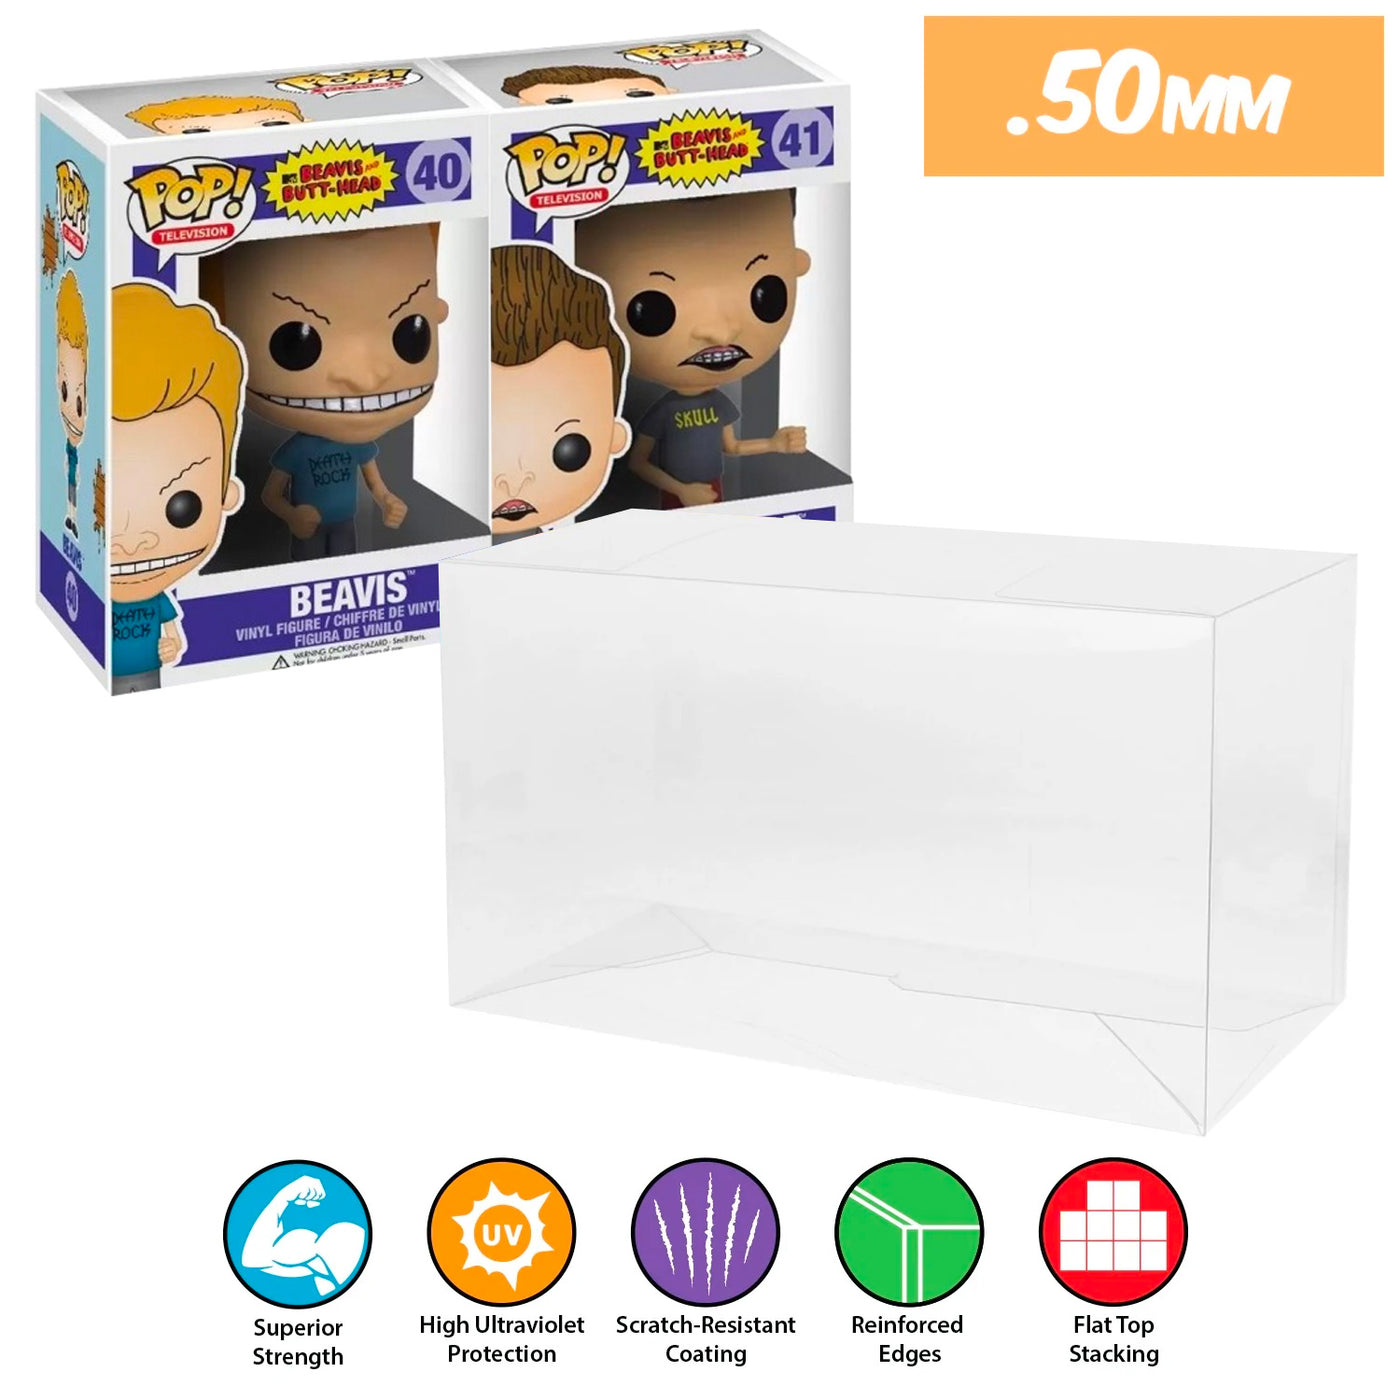 beavis butthead 2 pops side by side best funko pop protectors thick strong uv scratch flat top stack vinyl display geek plastic shield vaulted eco armor fits collect protect display case kollector protector